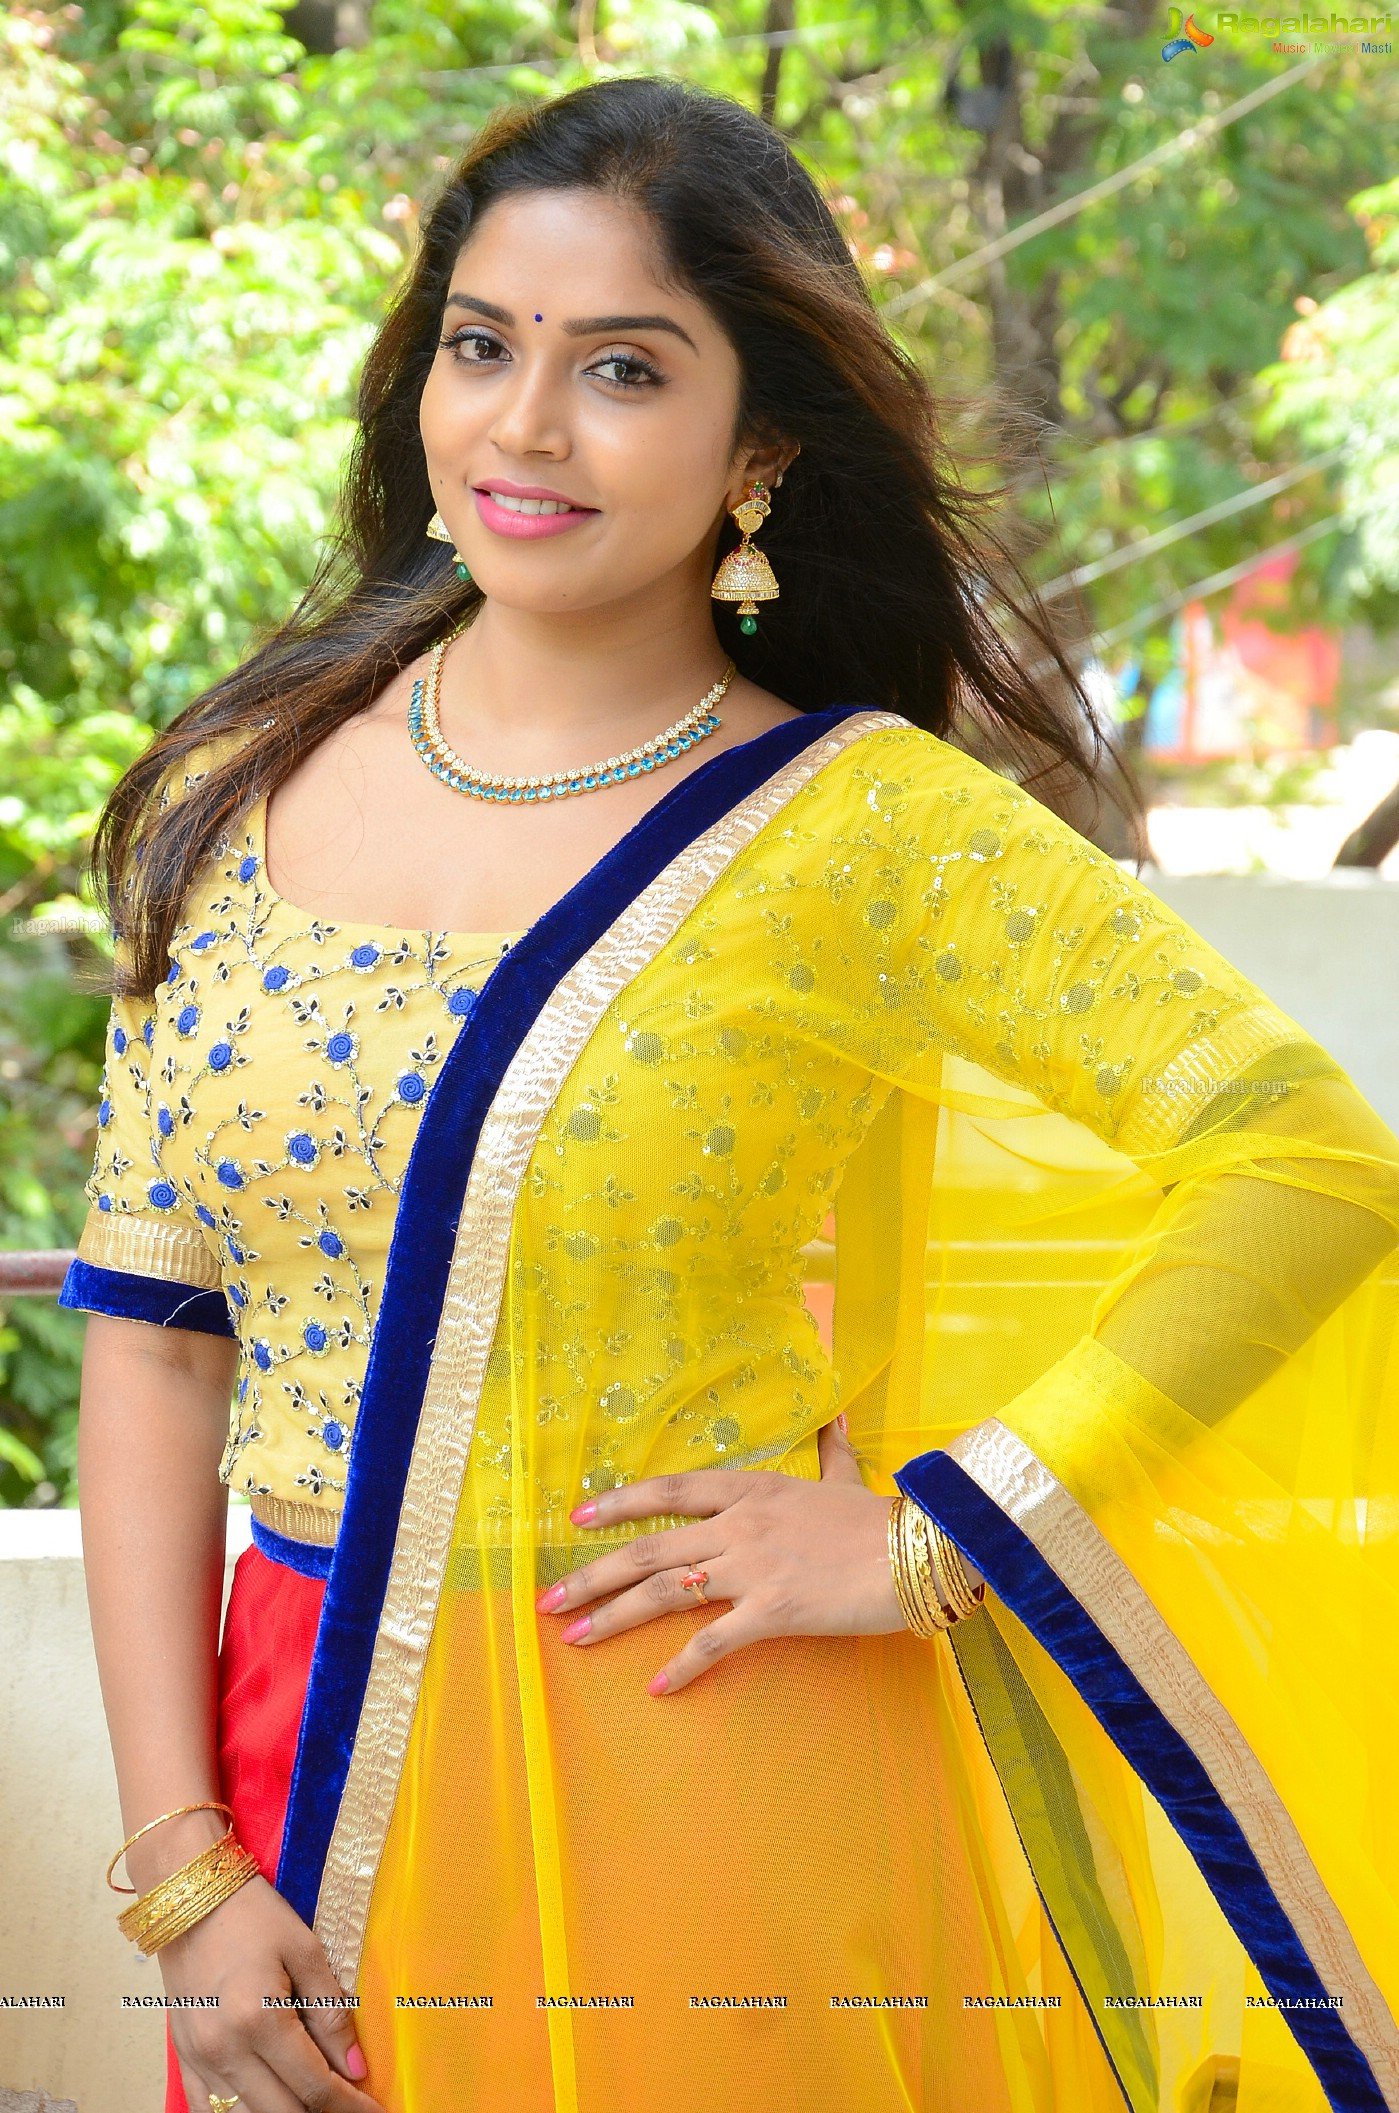 Karunya Chowdary (Posters)